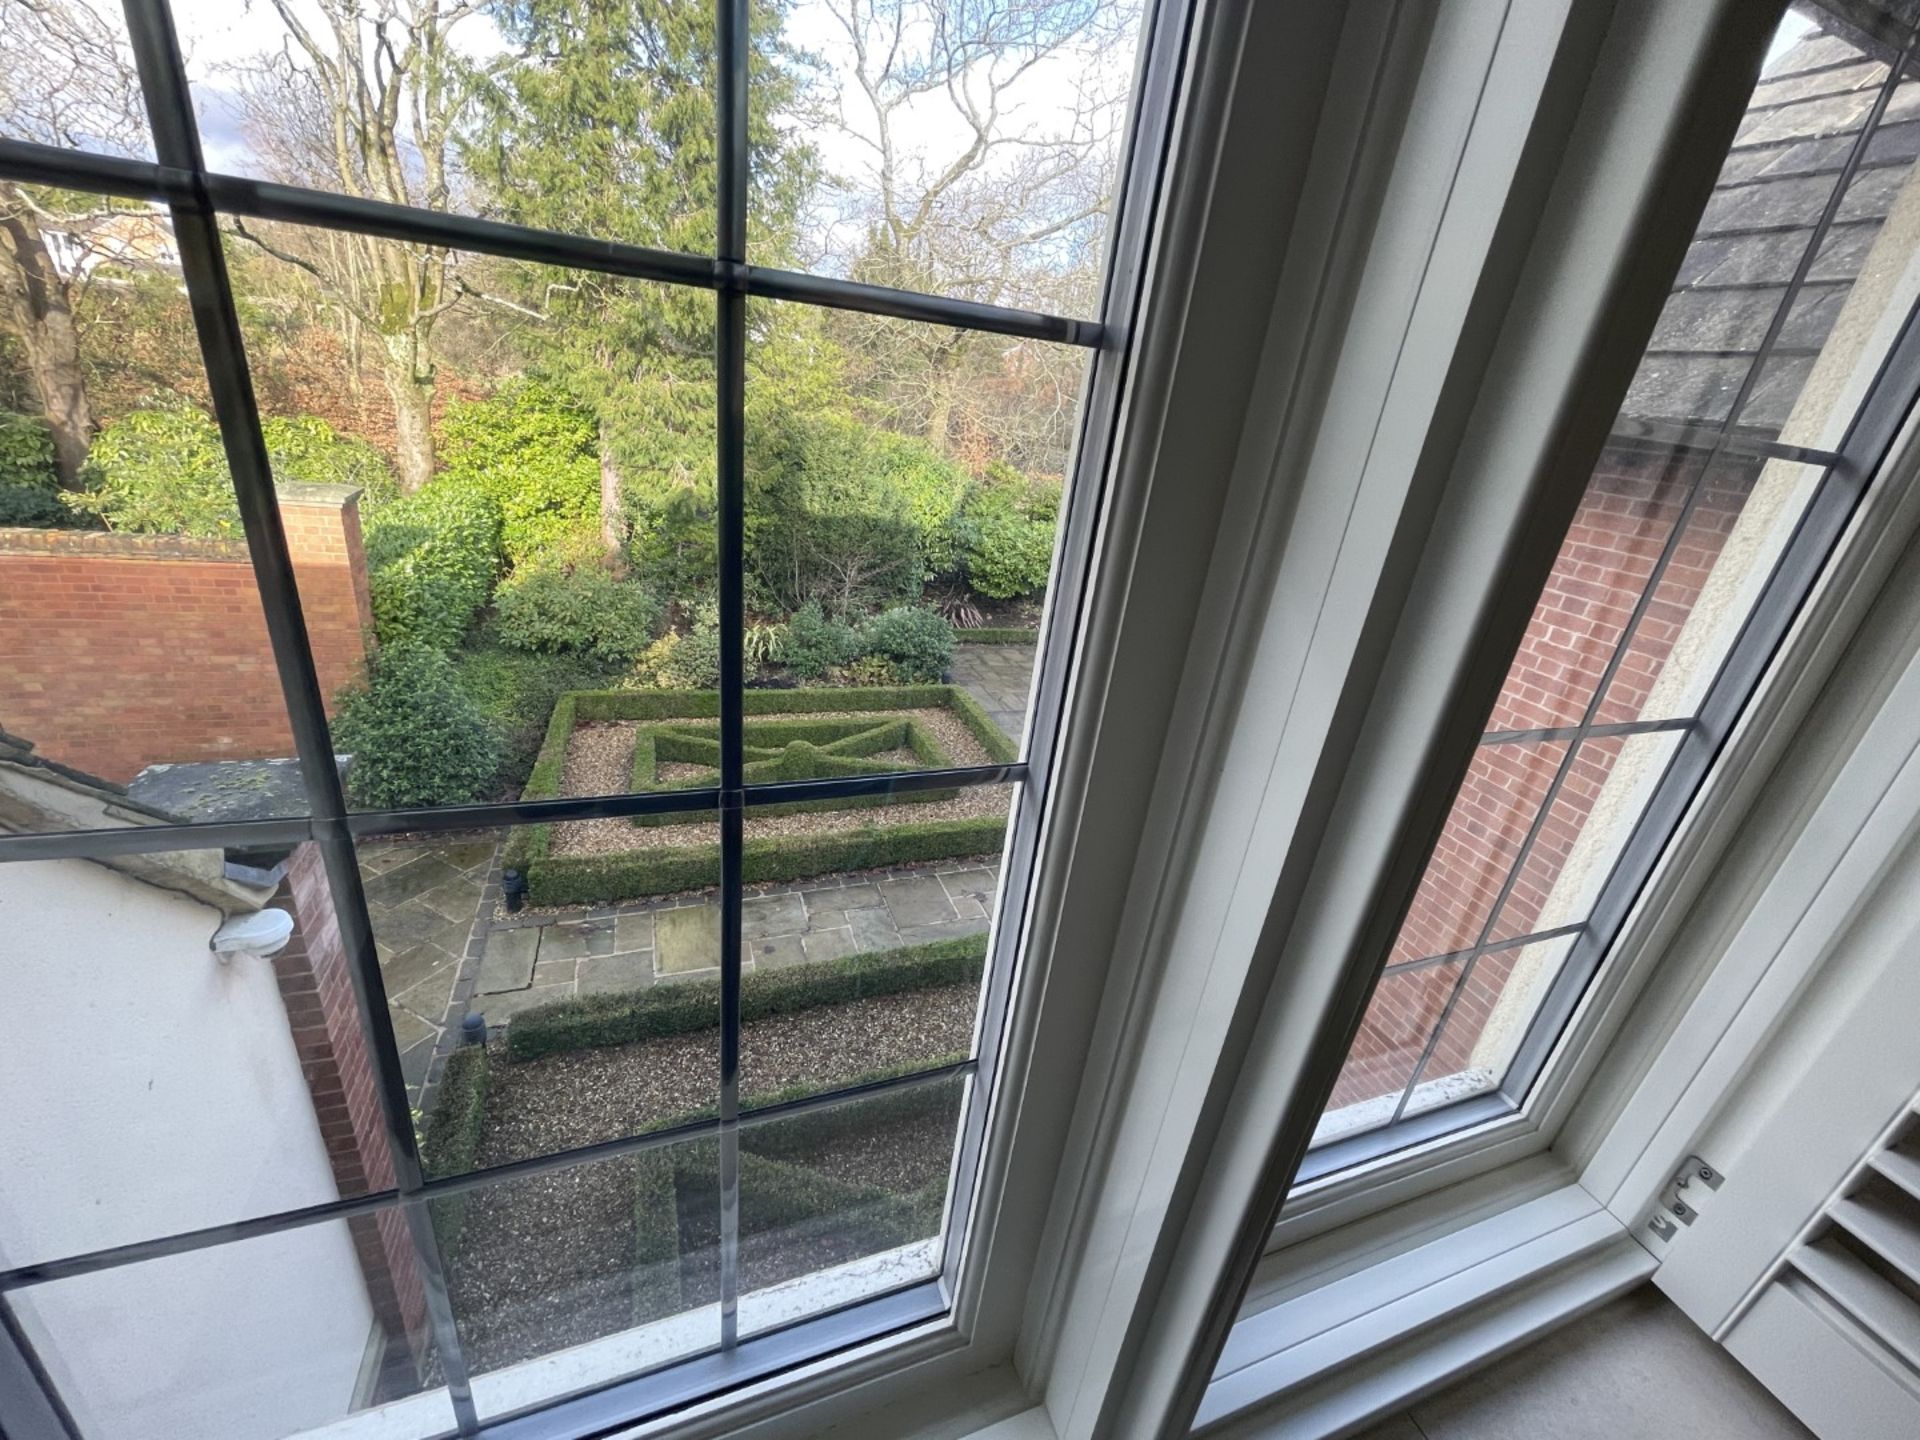 1 x Hardwood Timber Double Glazed Leaded 3-Pane Window Frame fitted with Shutter Blinds - Image 9 of 15